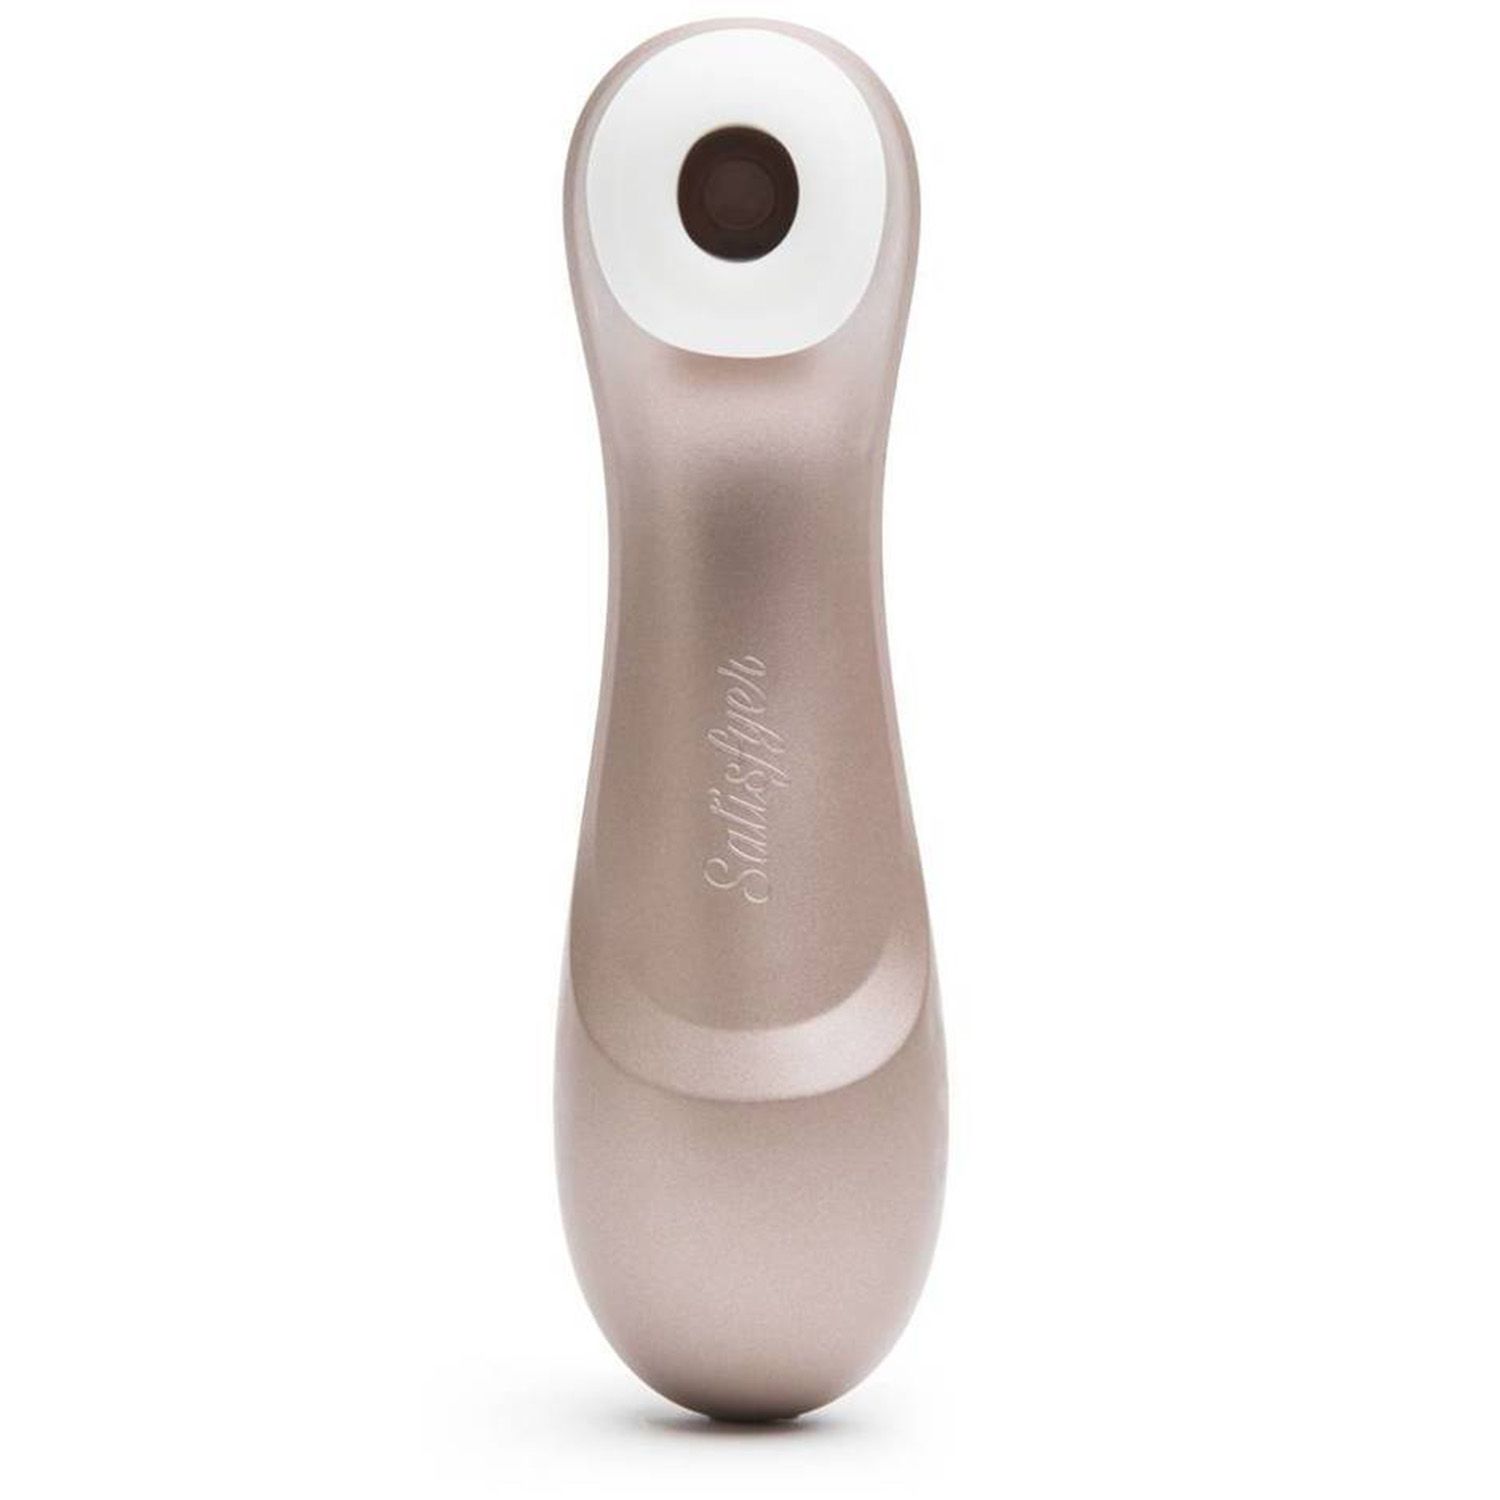 Satisfyer Pro Usb Rechargeable Clitoral Stimulator For Women Imported